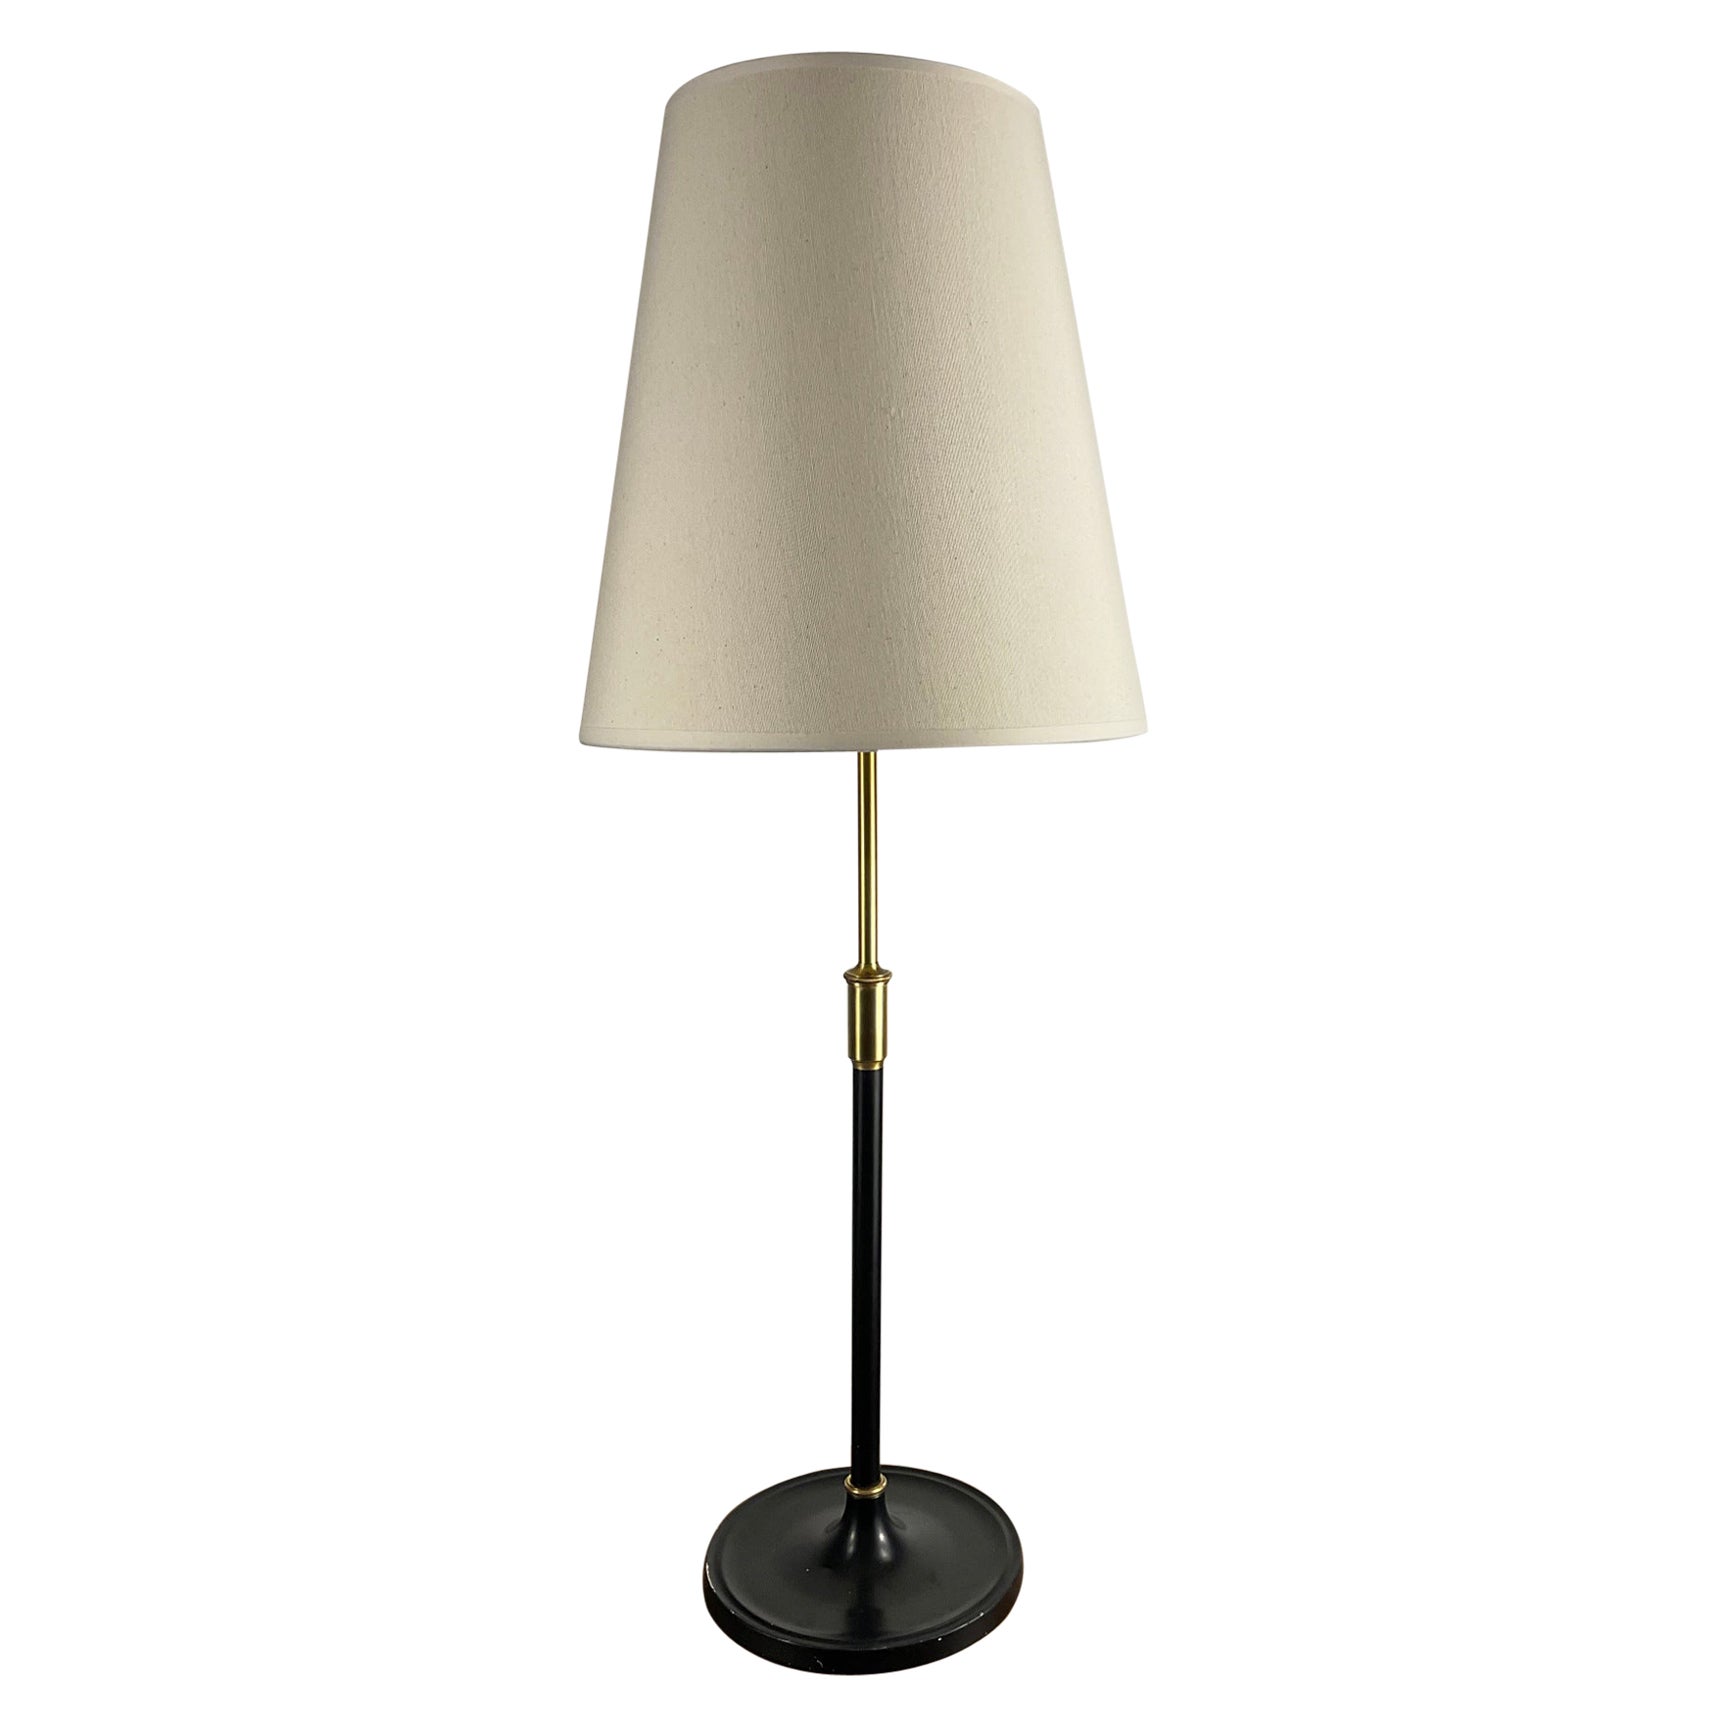 1950s Danish Table Lamp Designed by Aage Petersen Manufactured by Le Klint For Sale